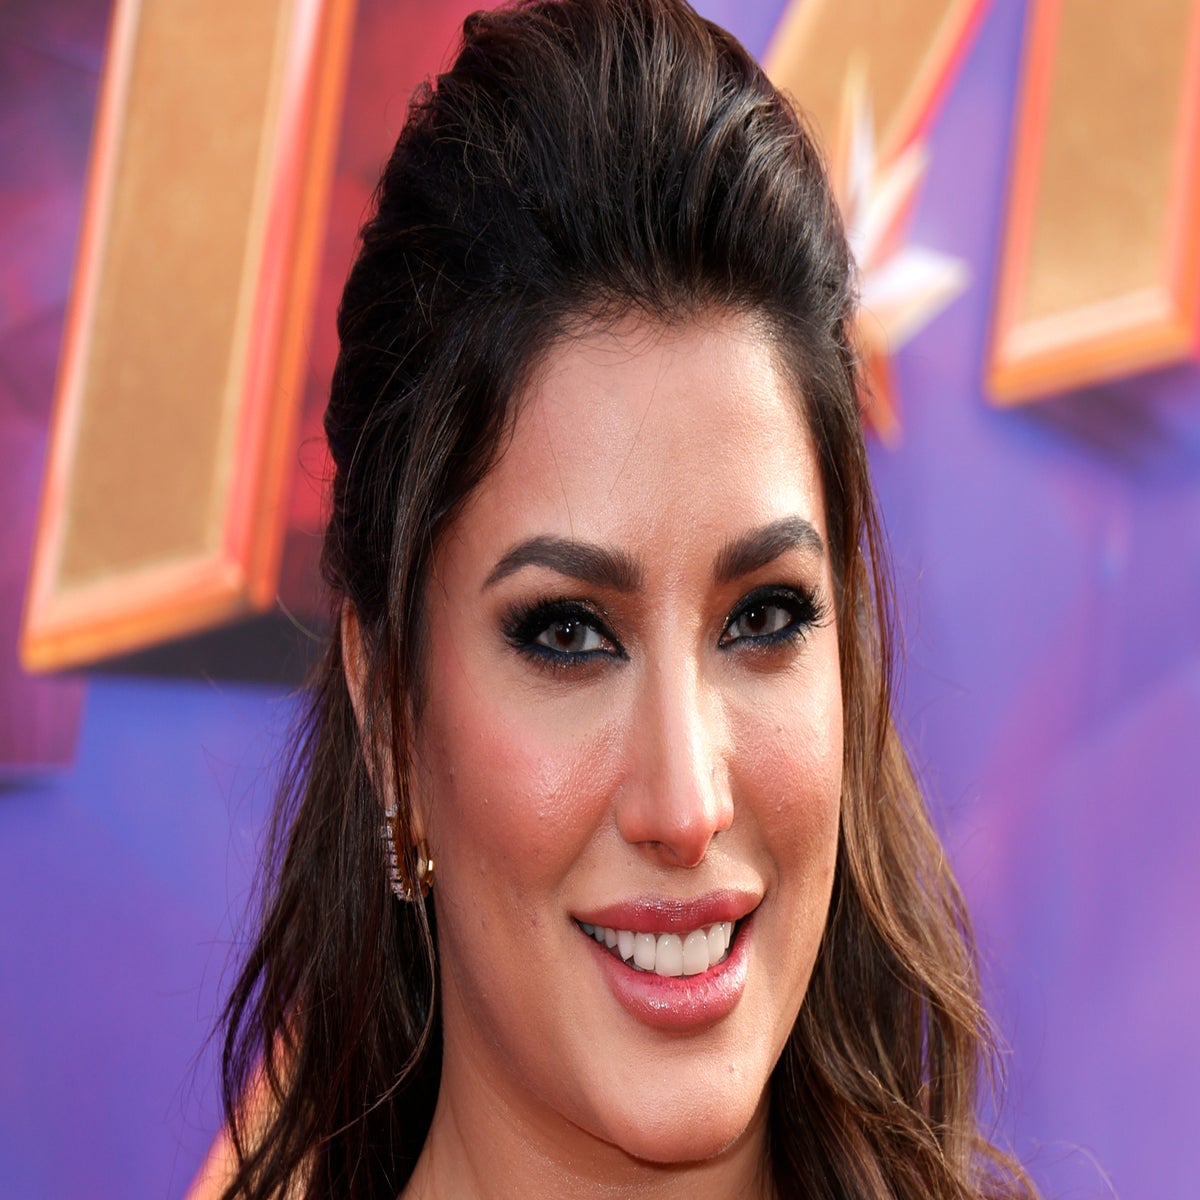 Pakistani Actress Kubra Khan Fuking - Ms Marvel actor lashes out at 'honey trap' claim: 'Shame on people who  blindly believe this bulls***' | The Independent